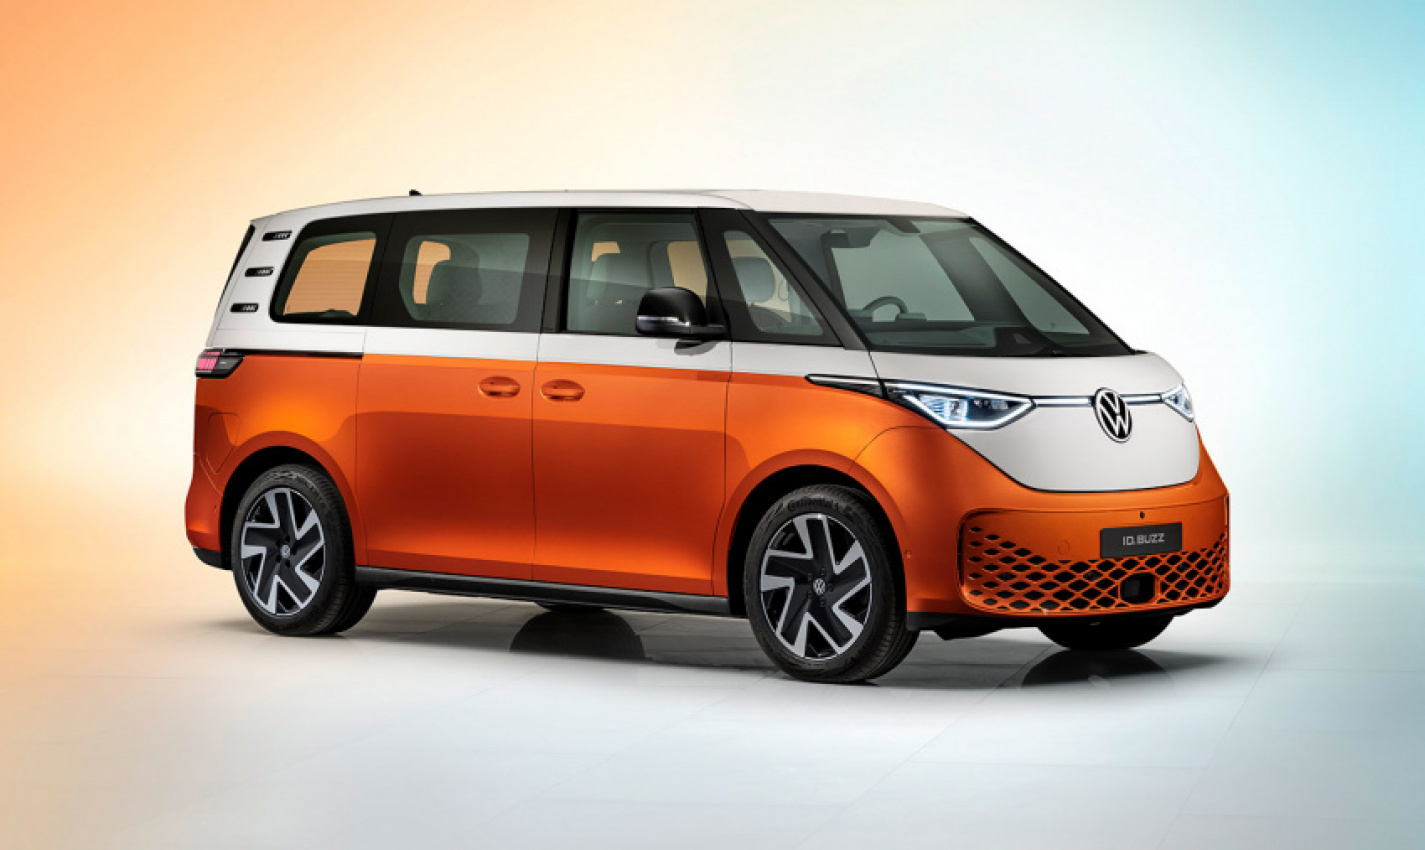 autos, volkswagen, volkswagen cars, volkswagen electric vehicle, volkswagen ev, volkswagen id buzz features, volkswagen id. buzz, volkswagen modern type 2 microbus, volkswagen smiling car, volkswagen type 2 microbus, volkswagen id buzz revealed: when will it arrive in the us?